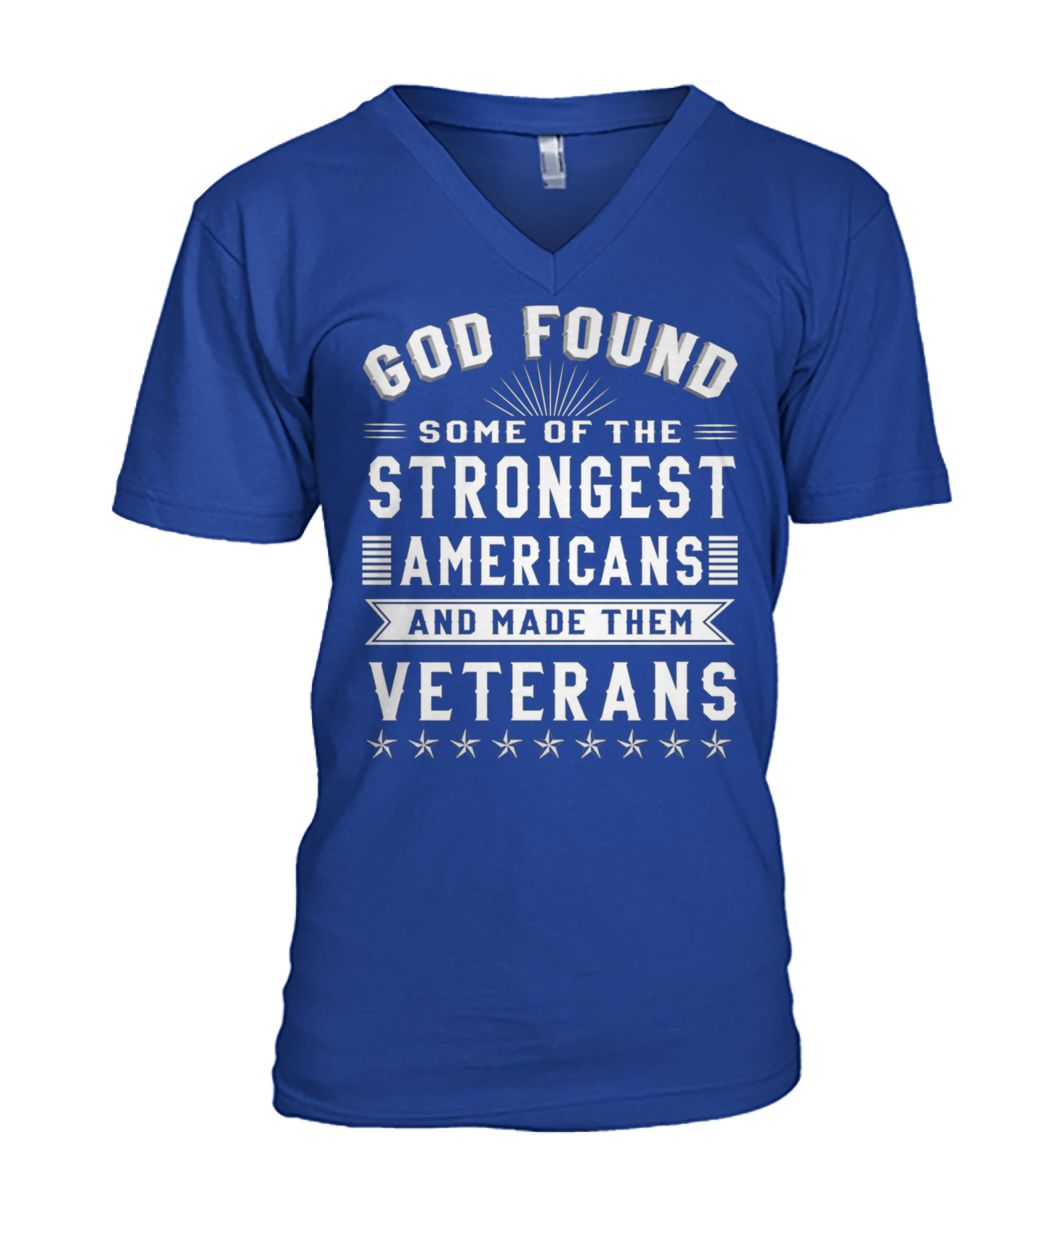 God found some of the strongest americans and made them veterans mens v-neck